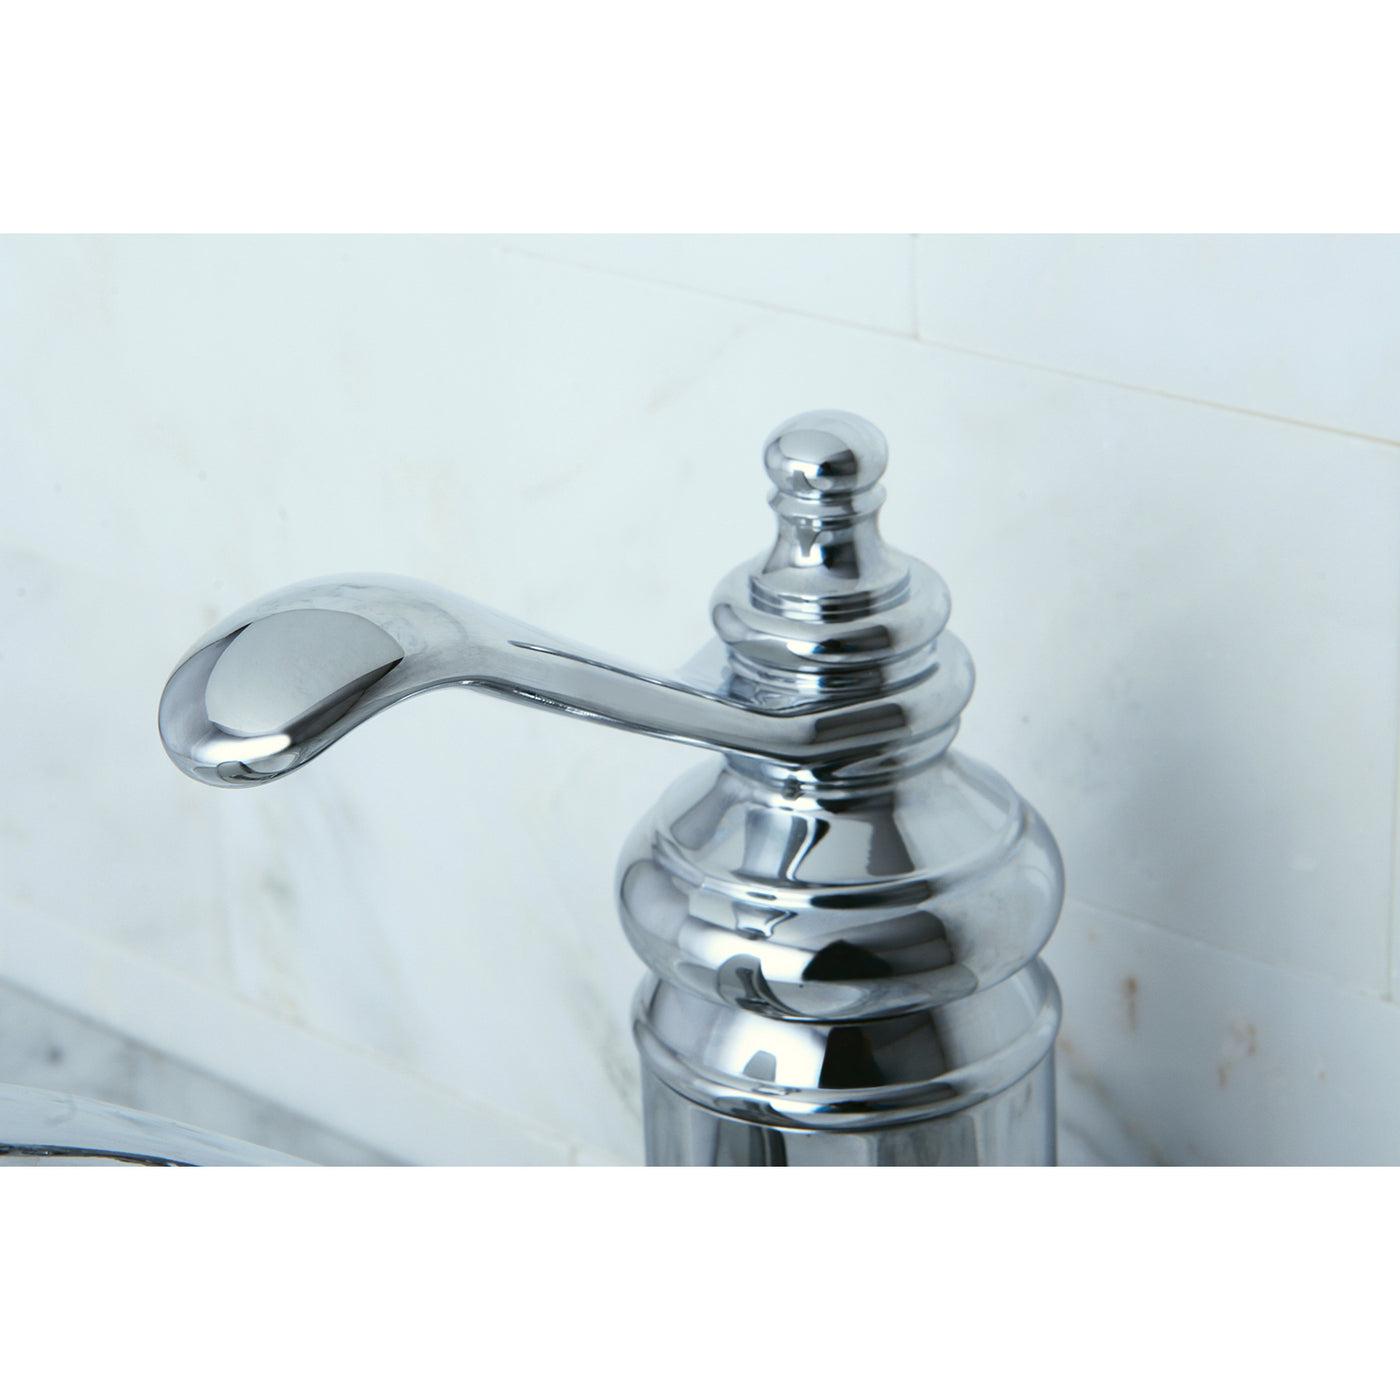 Elements of Design ES3401TL Single-Handle Bathroom Faucet with Push Pop-Up, Polished Chrome